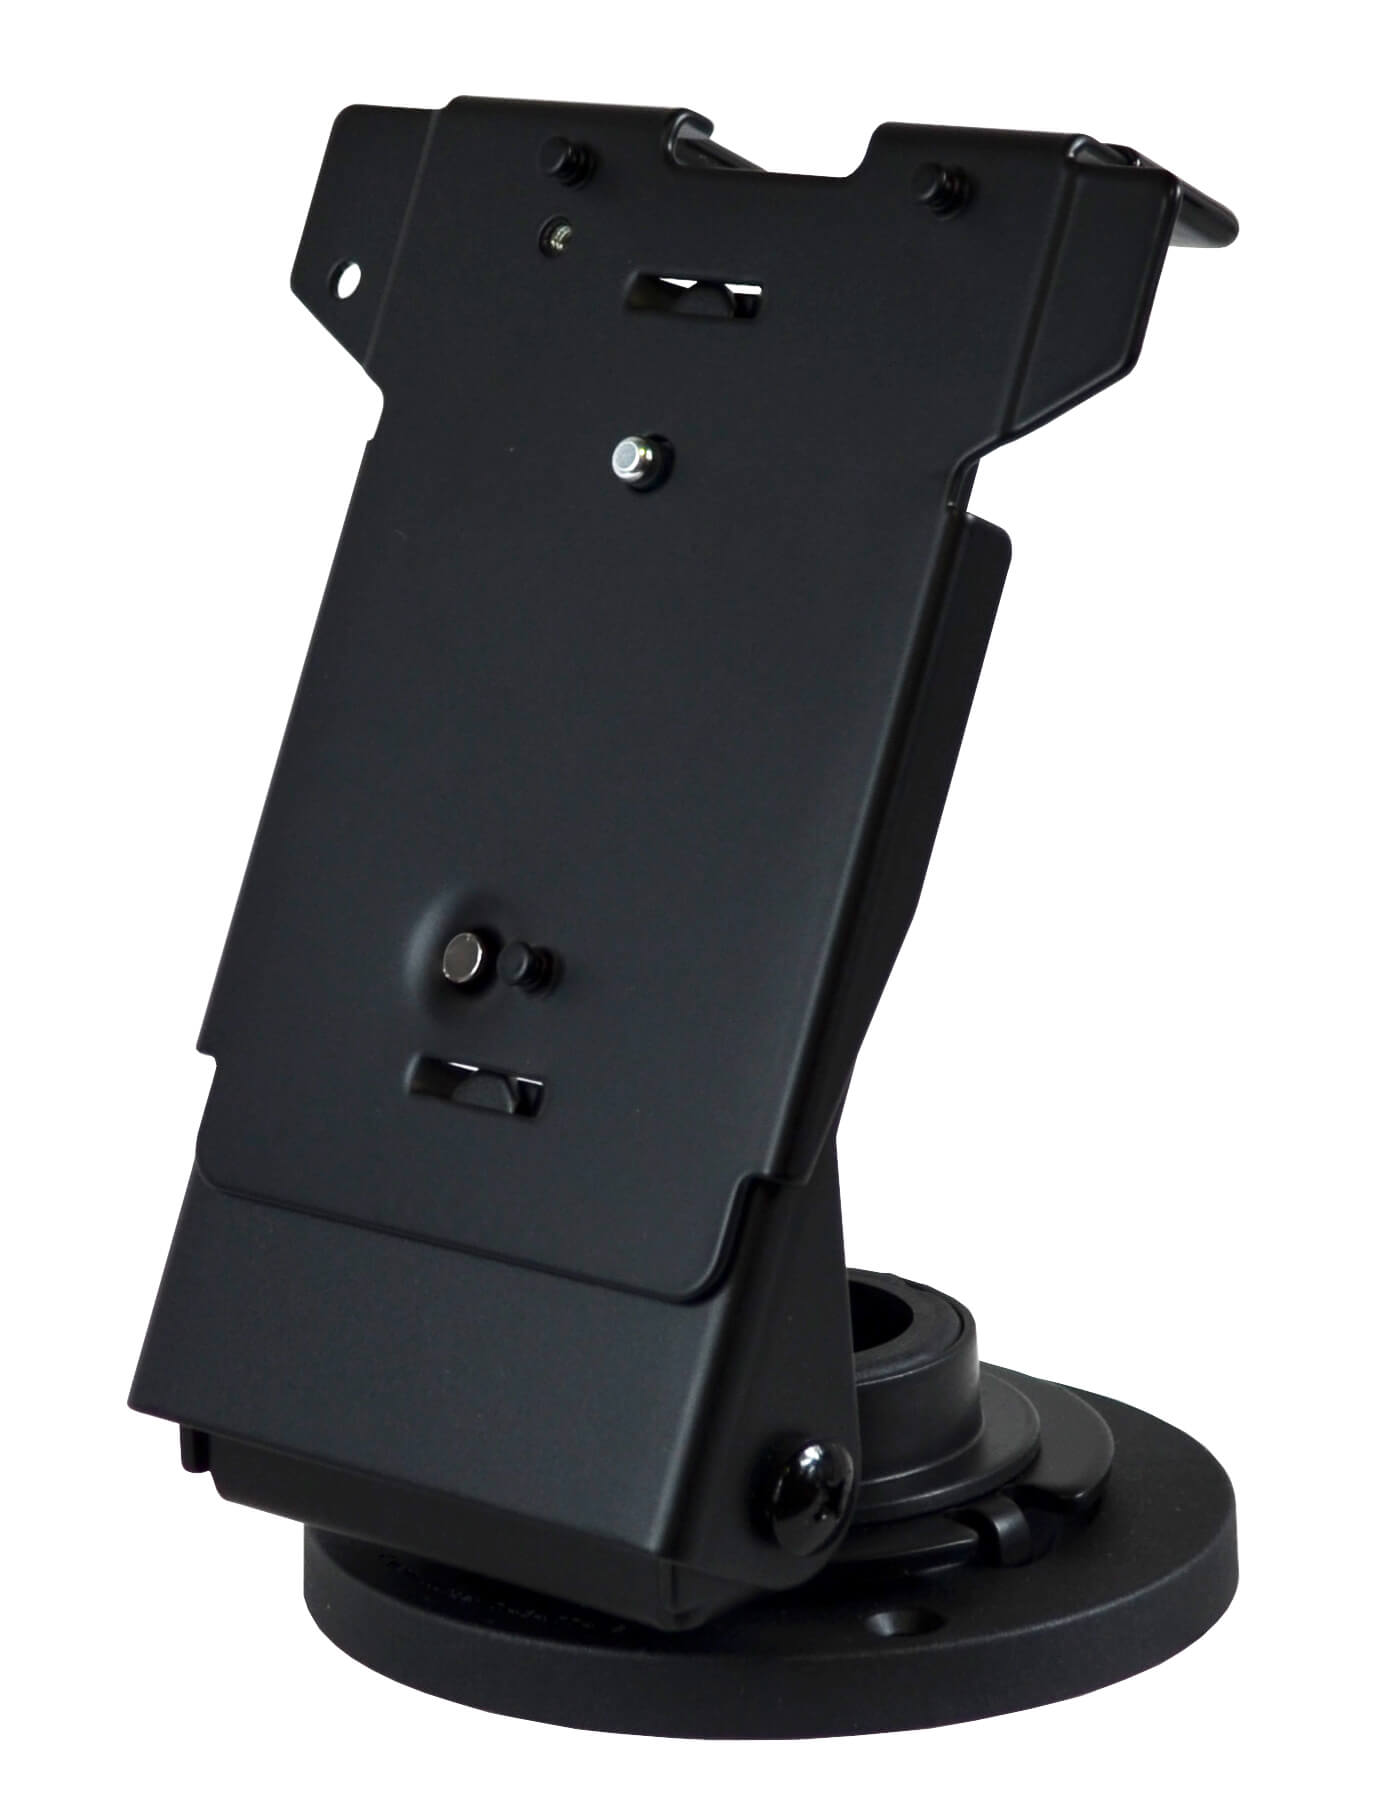 Round Base Quick Release Metal Stand for Verifone MX915/MX925/M424/M425 Payment Terminals